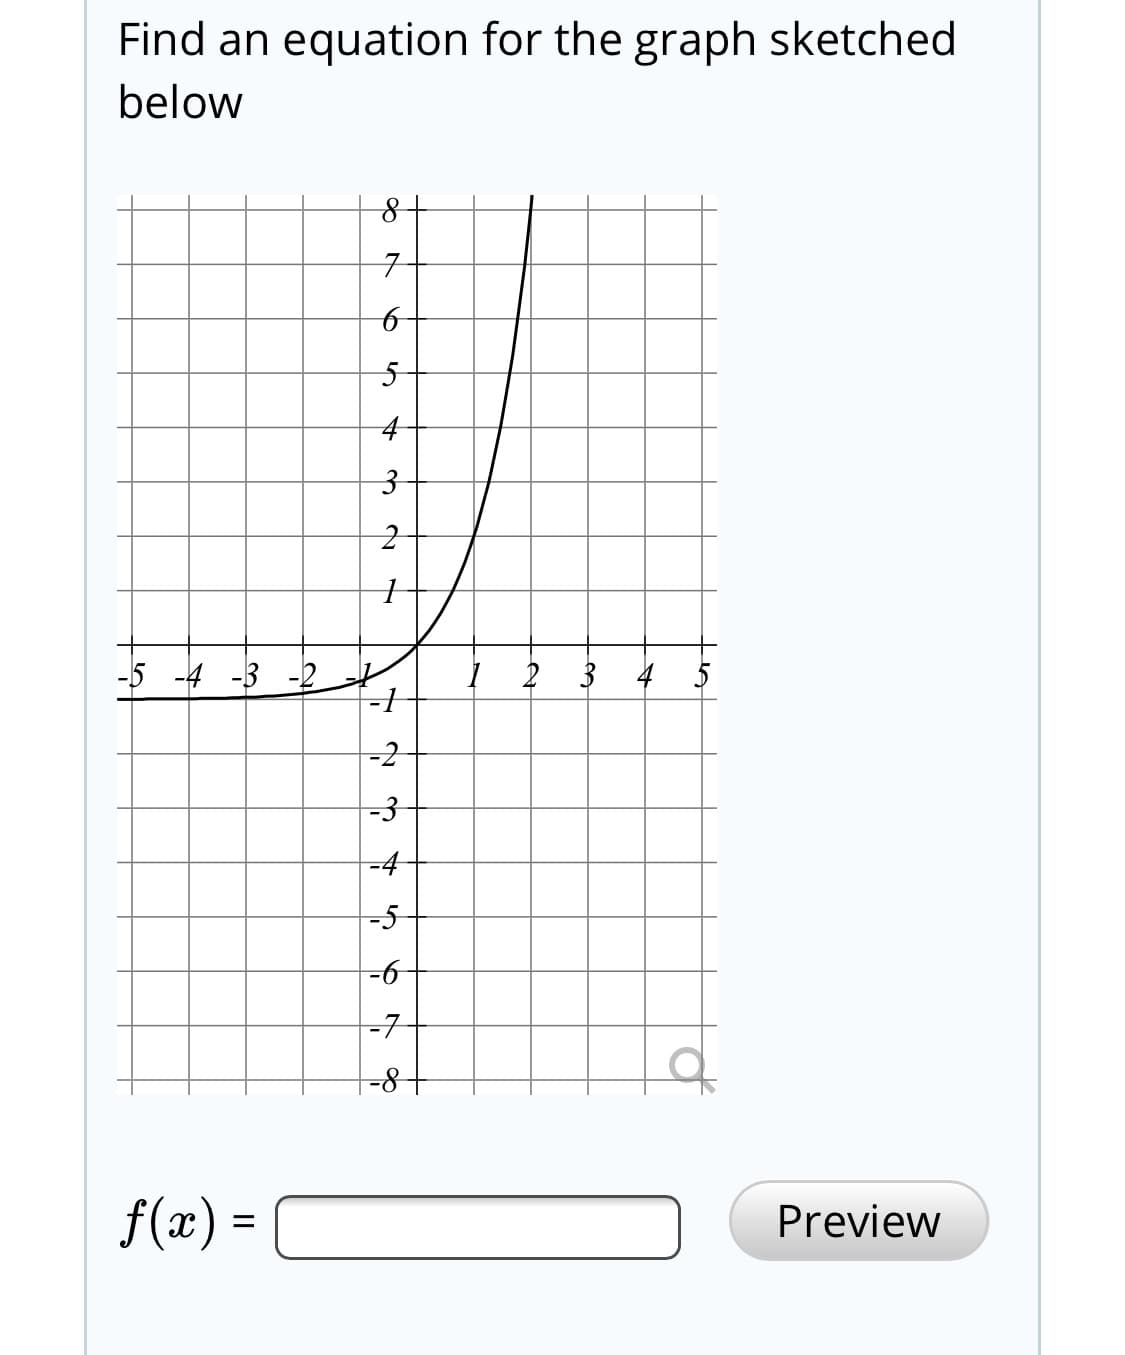 Find an equation for the graph sketched
below
7-
-5 -4 -3 -2
-2
-3
-4
-5
--
-7
-8-
f(x) =
Preview
3.
